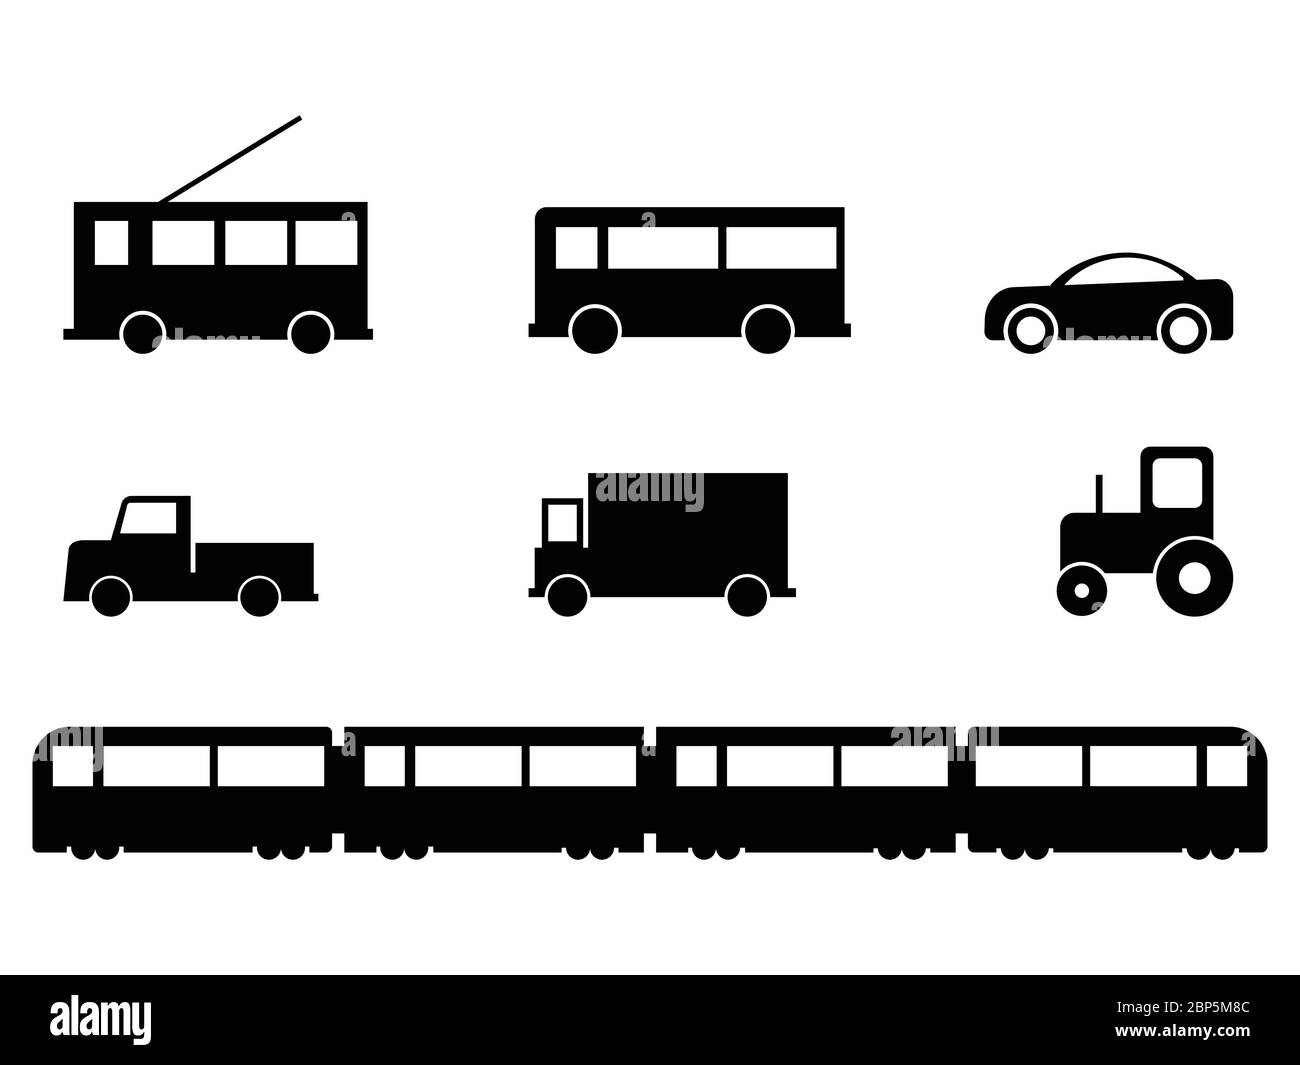 Land Transport Vehicles Set. A set of various ground vehicles. Bus tramp car lorry truck tractor train. Black and white EPS Vector Stock Vector